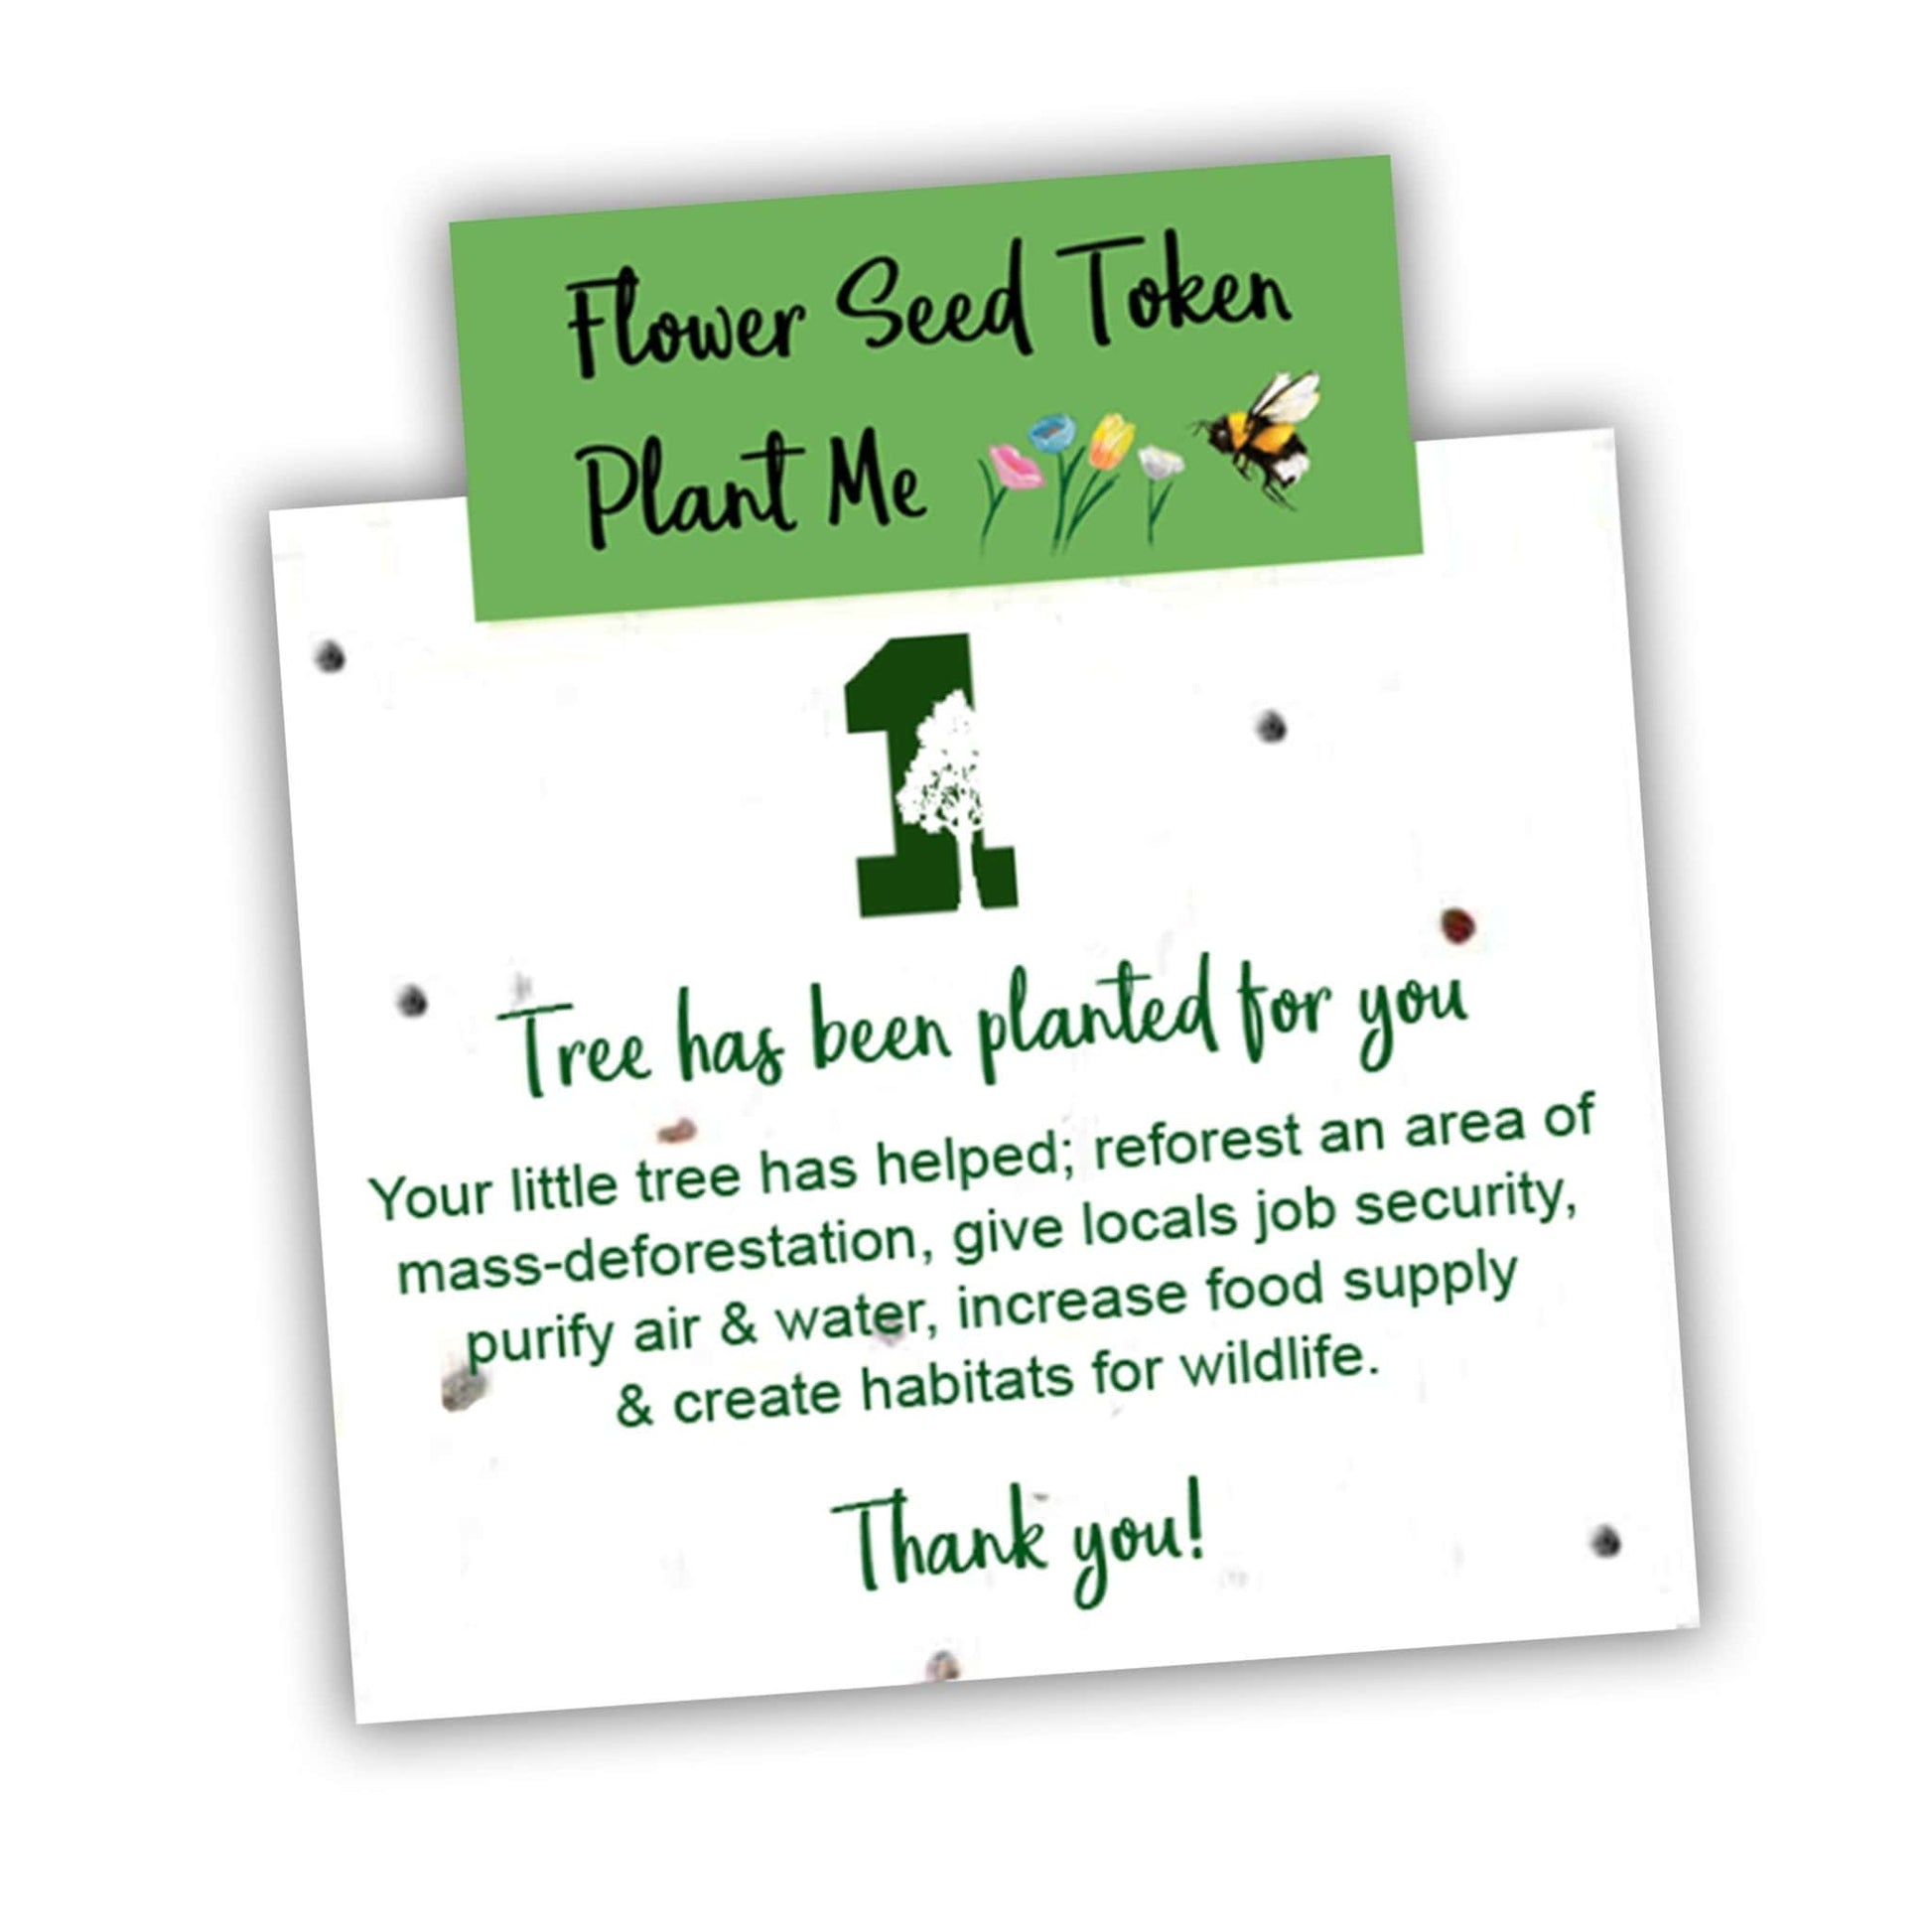 Recycled card that plants a tree - blue tit design, image shows flower seed token